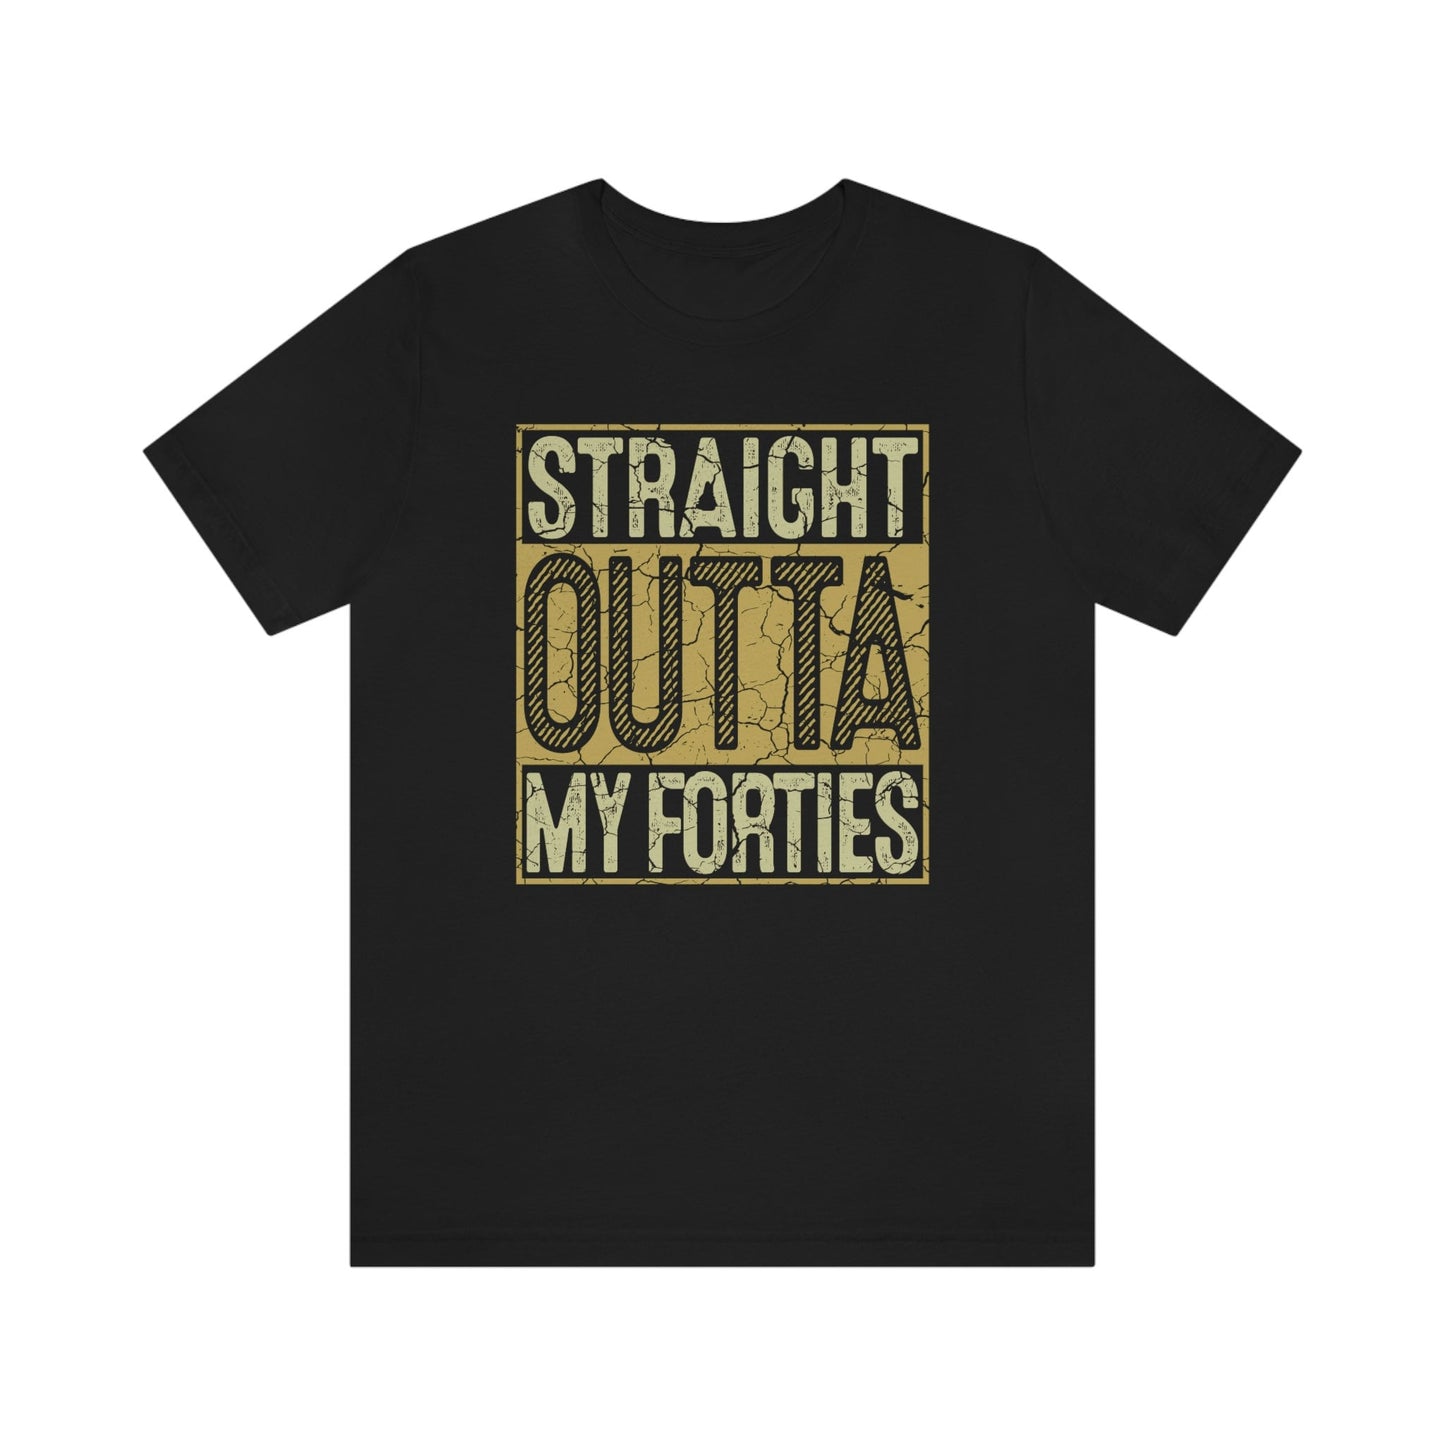 40th birthday gift shirt for woman or man, Straight Outta my Forties Gift shirt for wife or husband